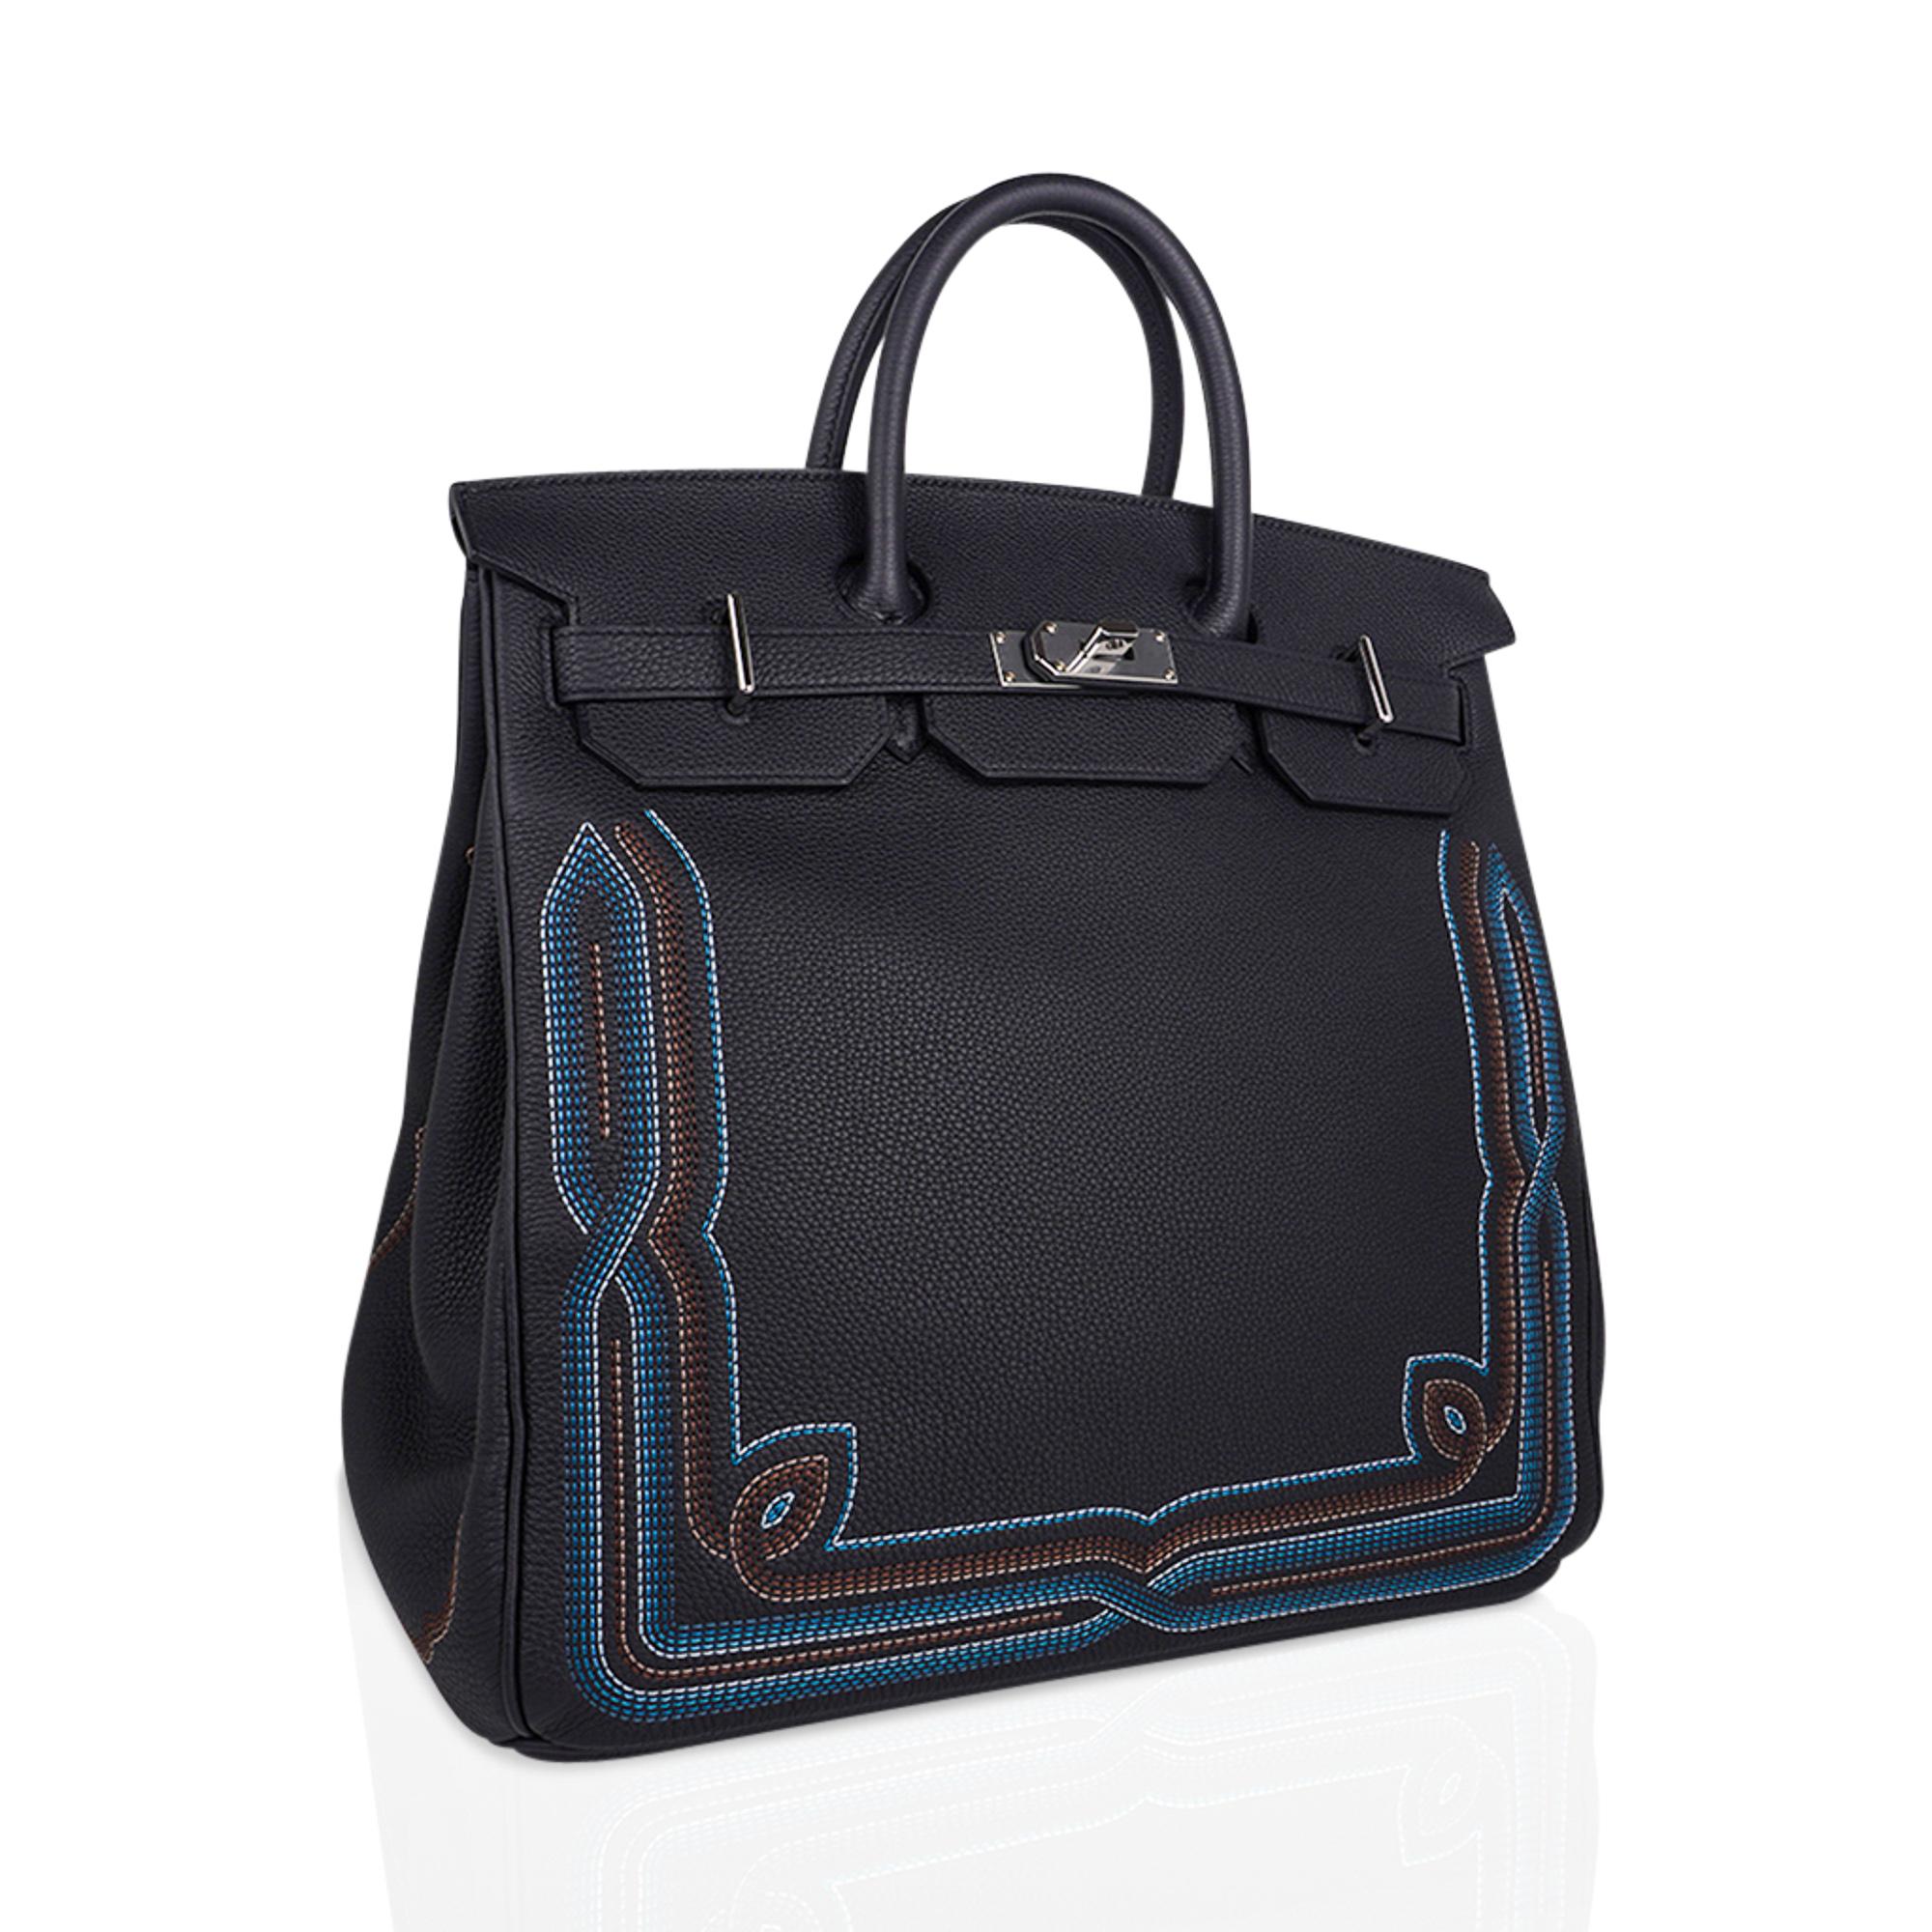 Mightychic offers a  Limited Edition Hermes Runway Haut a Courroies or HAC bag is featured in Black with gorgeous embroidery detail.
Black Togo leather accentuates the Blue and Camel western influenced embroidery  in the front and rear..